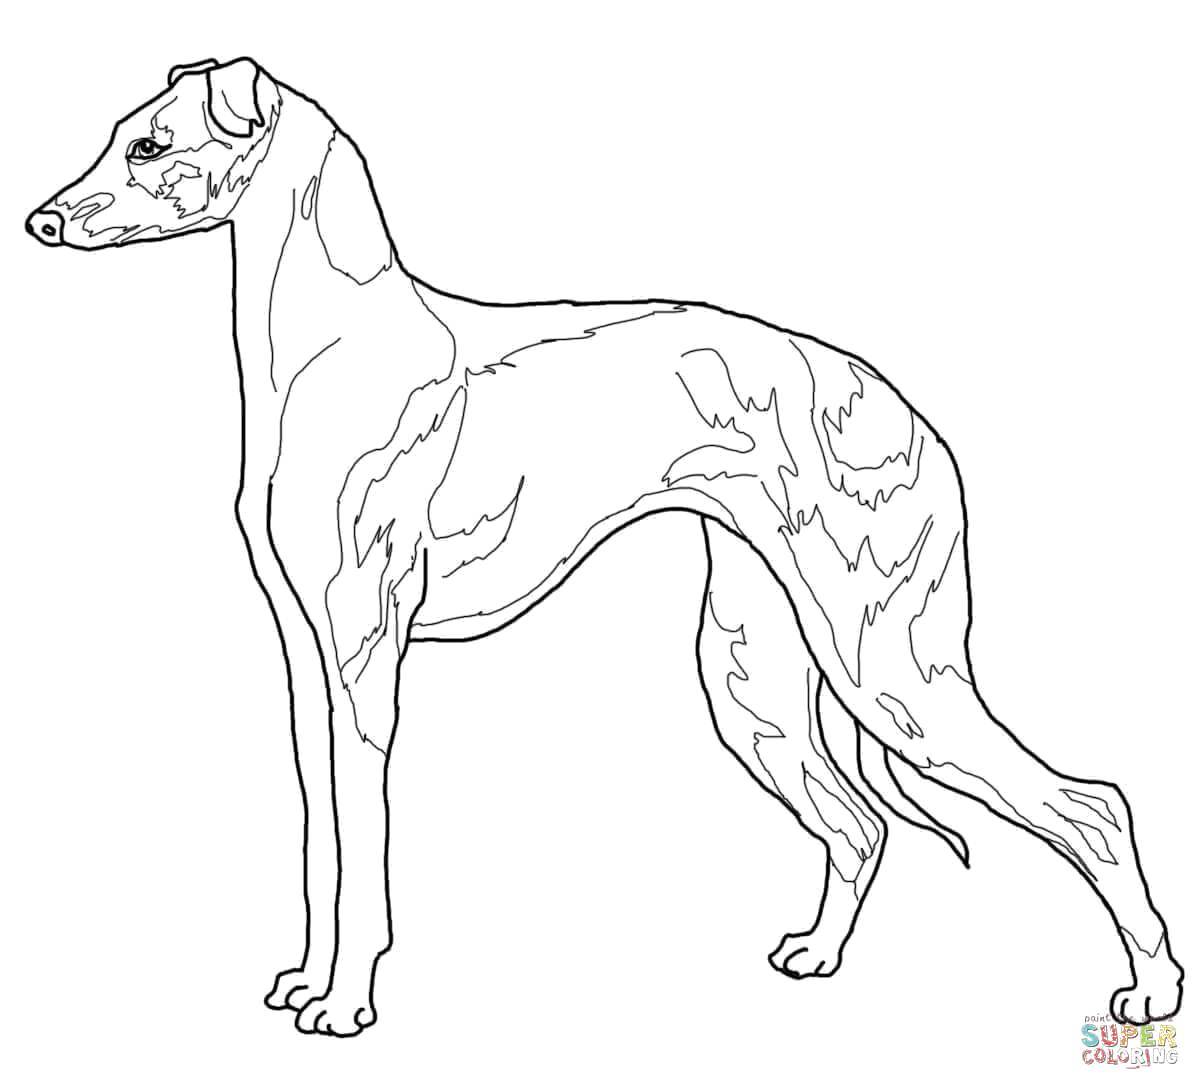 Coloring Hound. Category dogs. Tags:  dogs, animals.